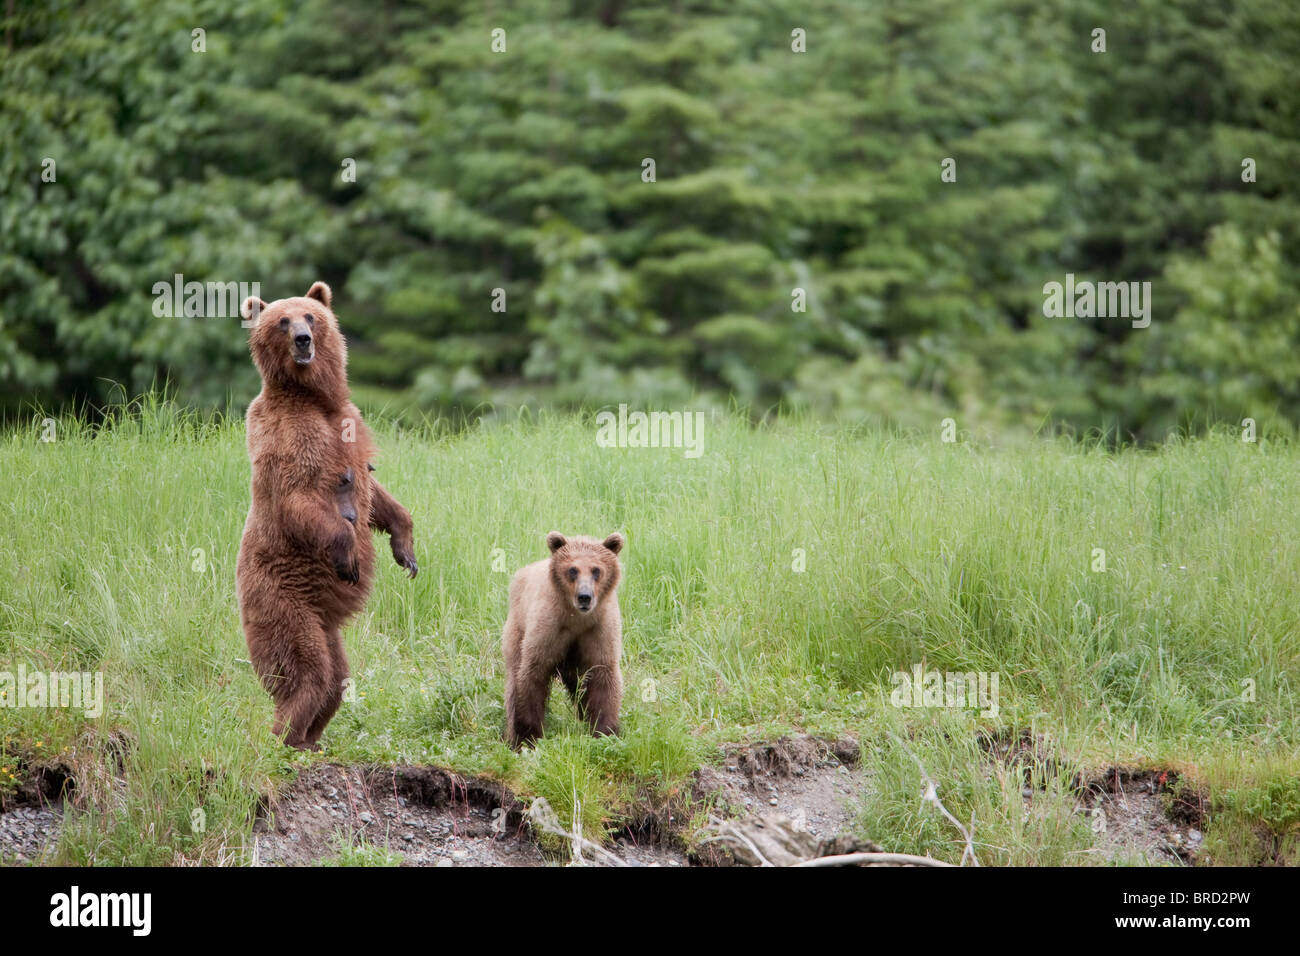 Brown bear female stands  with her cub in tall grasses, Prince William Sound, Chugach Mountains, Chugach National Forest, Alaska Stock Photo